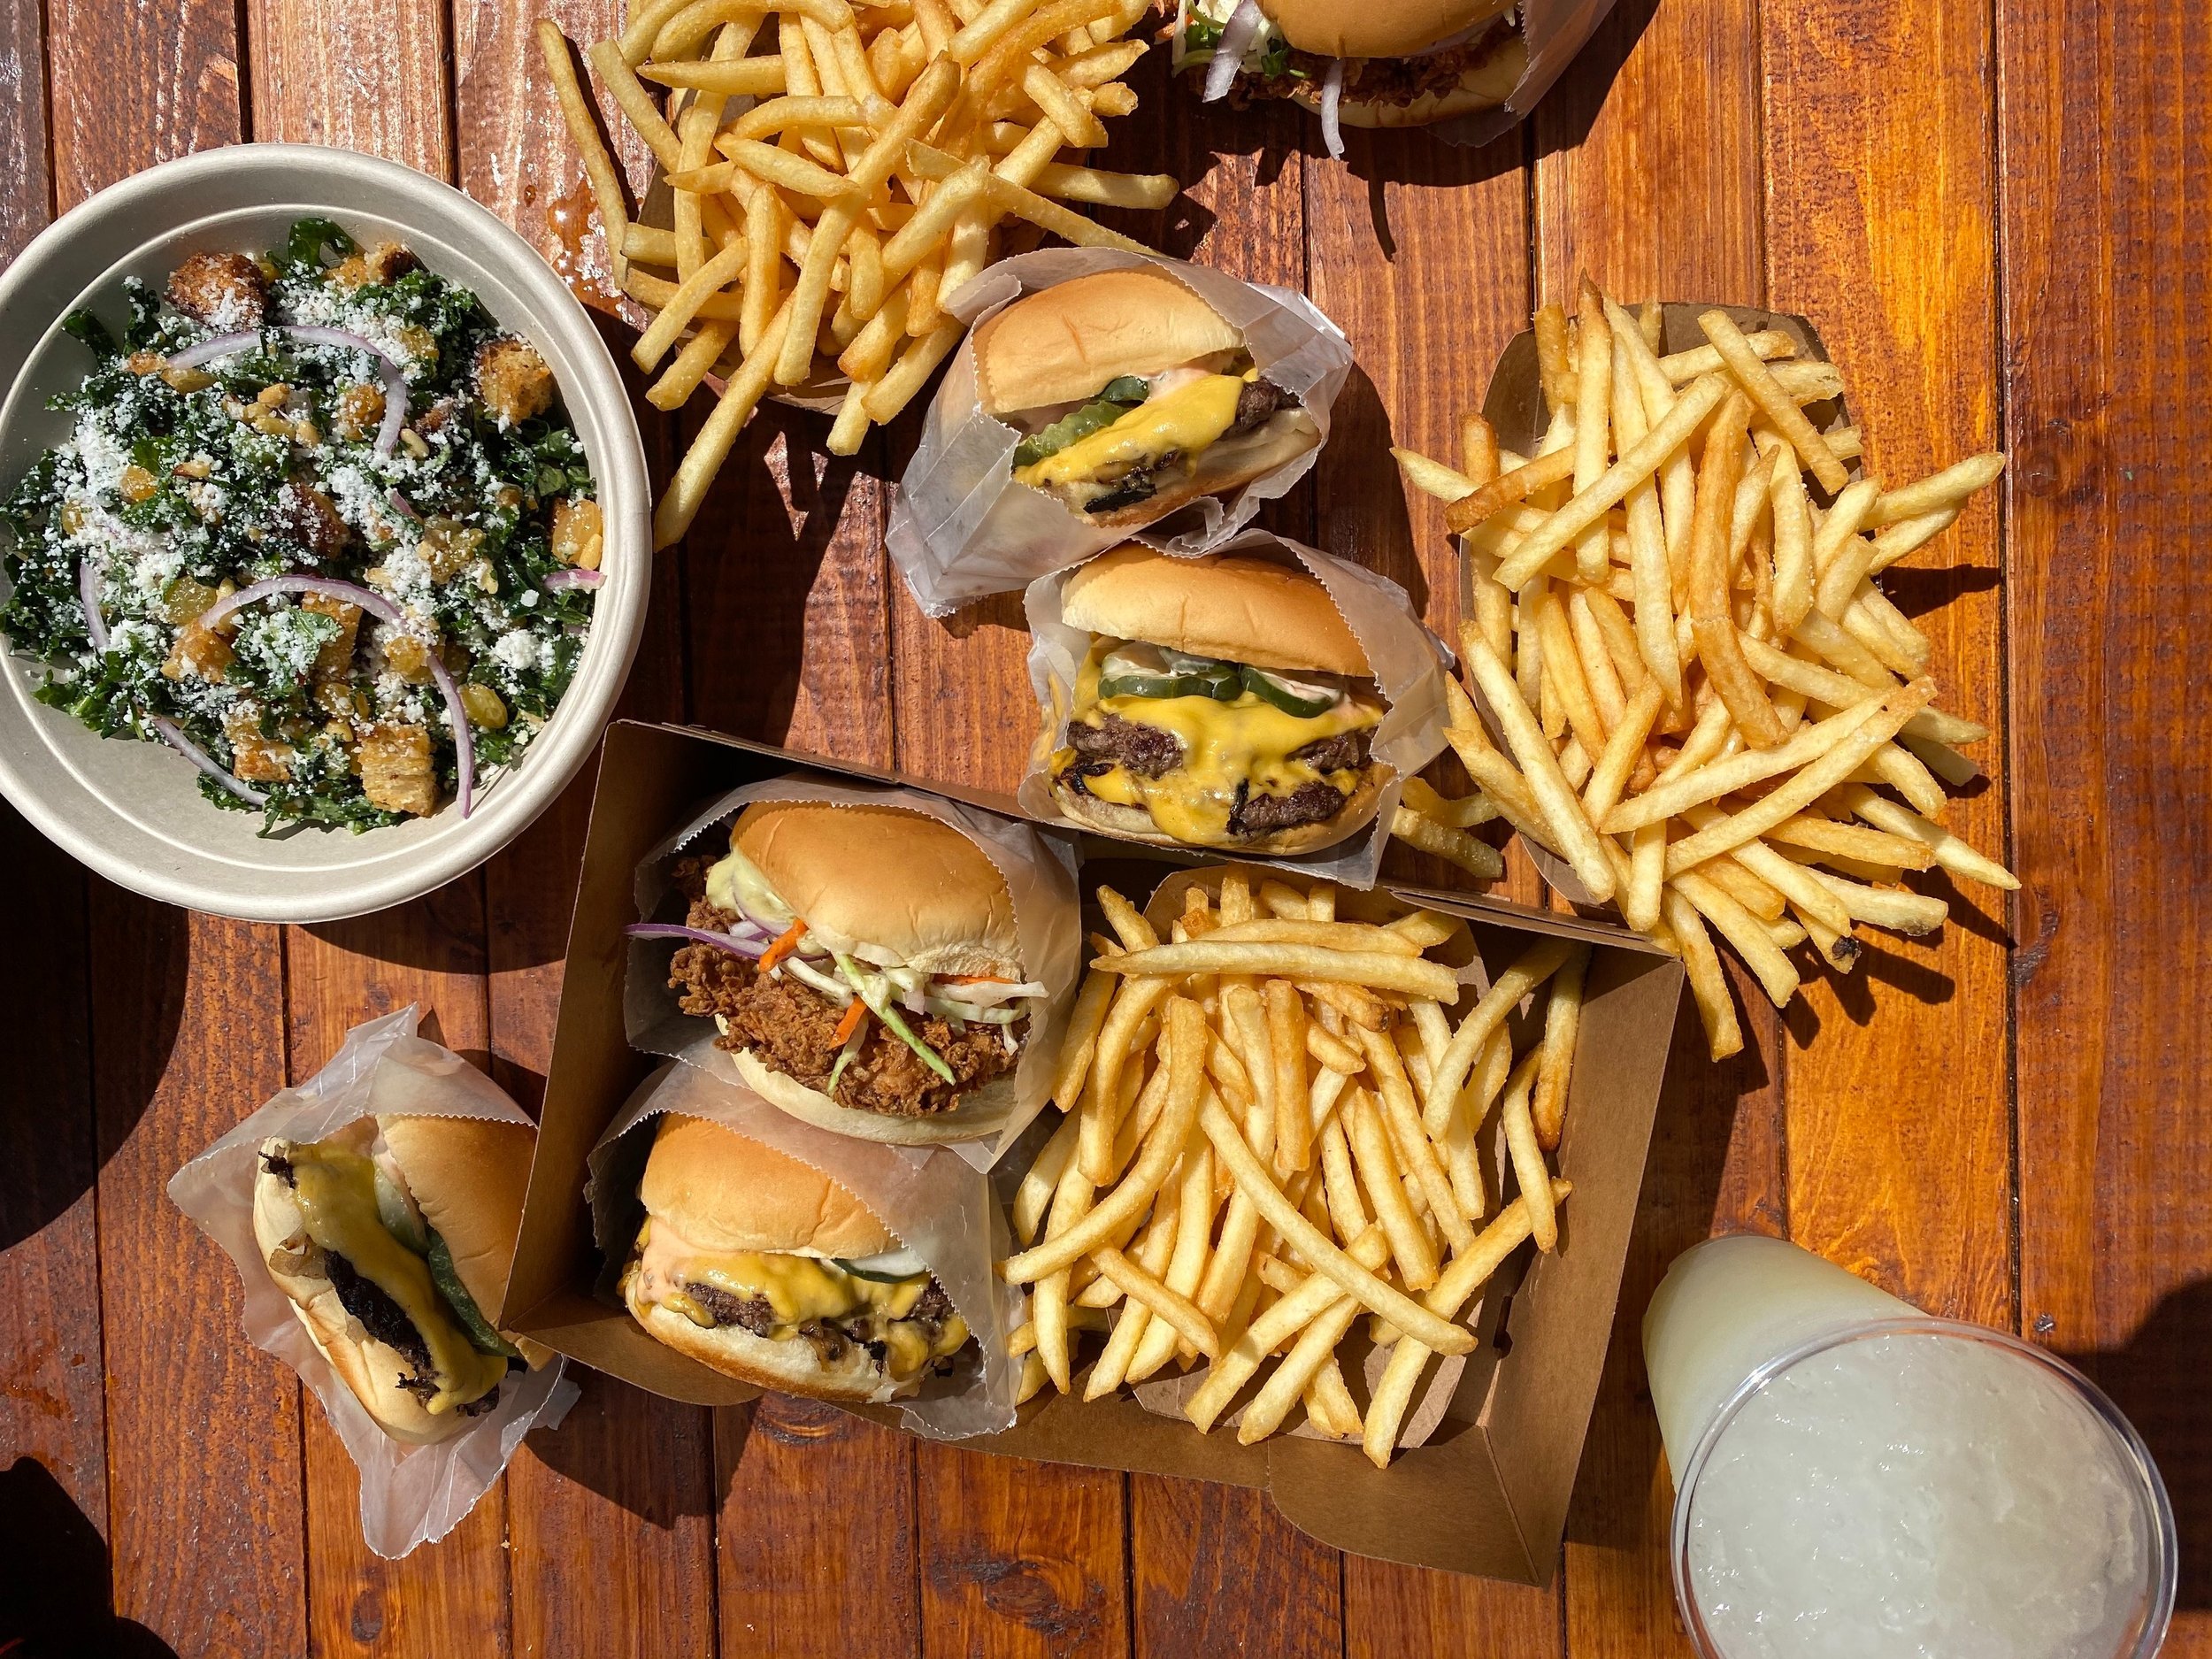  wooden tabletop view of food including burgers, fried chicken sandwiches, french fries and a kale salad 